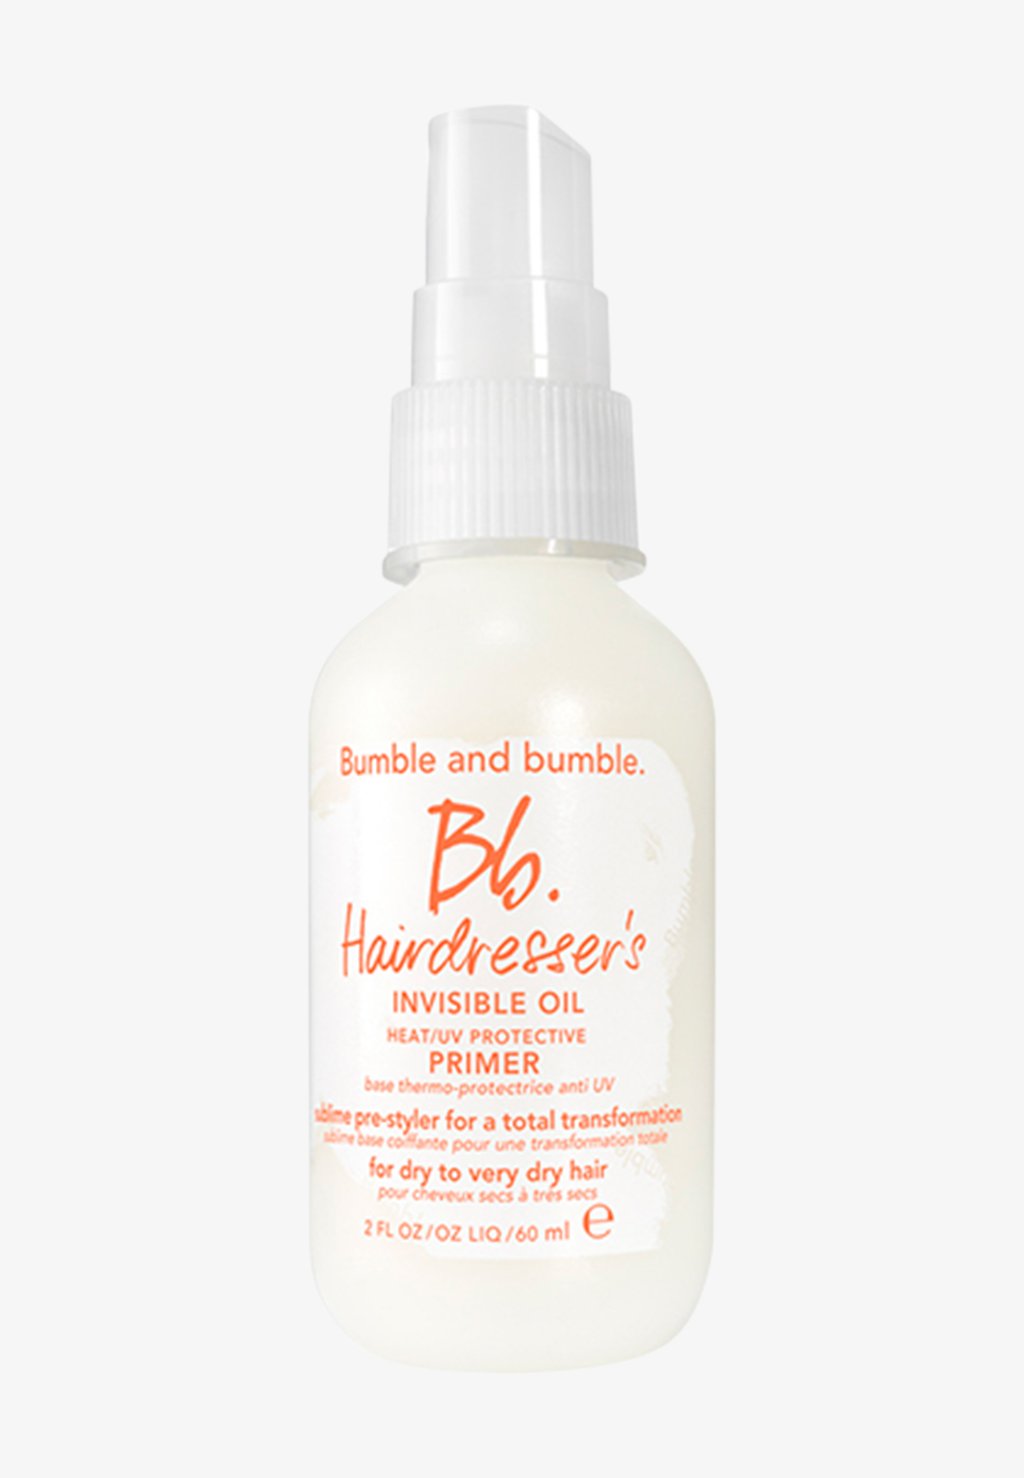 Уход за волосами Hairdresser'S Invisible Oil Primer Bumble and bumble